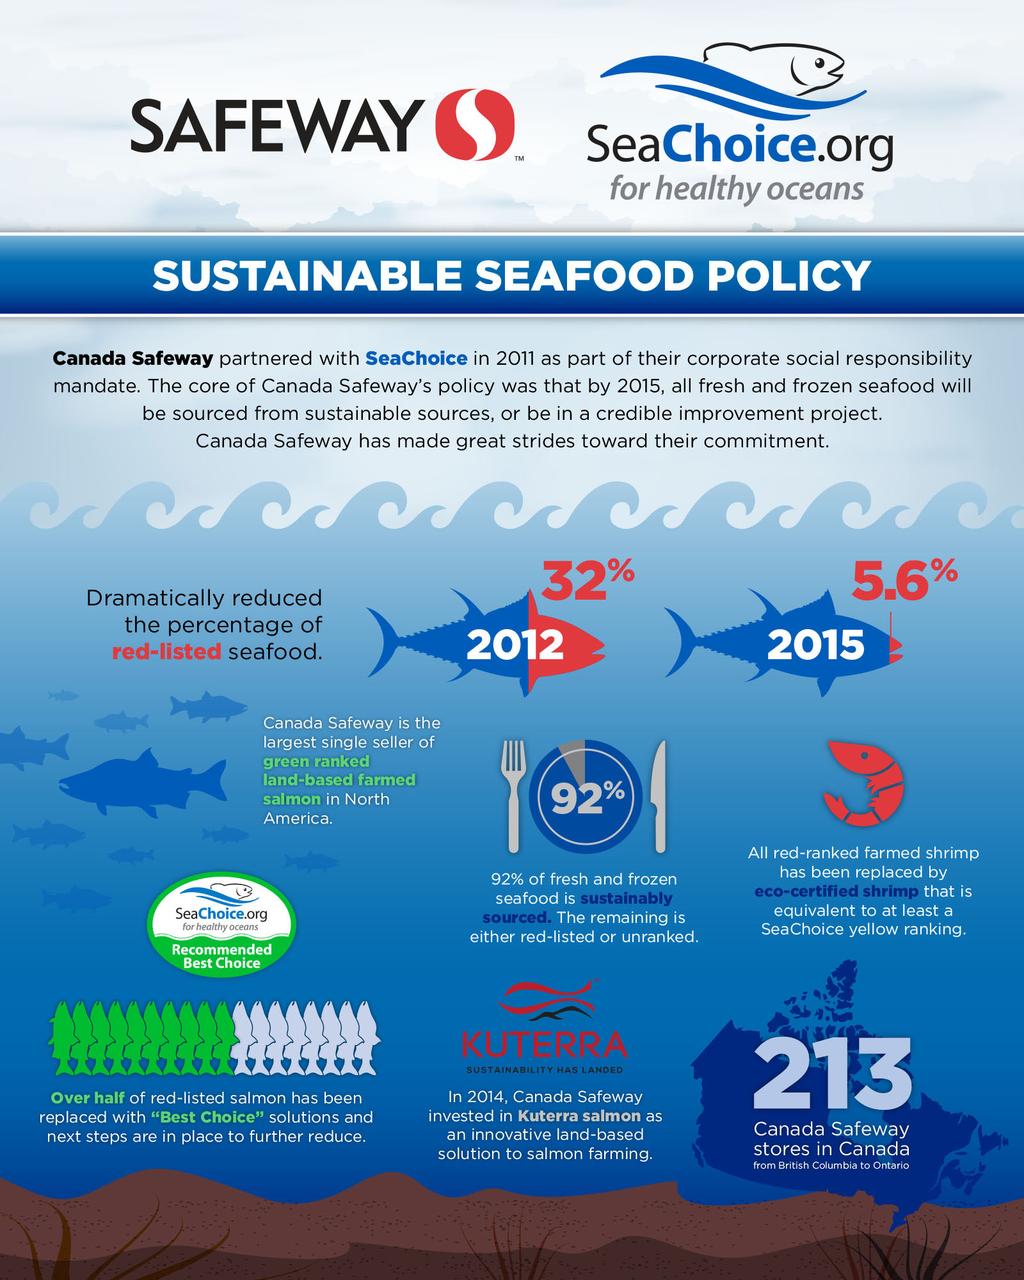 Canada Safeway receives an A+ on seafood sustainability In 2011, Canada Safeway made an important commitment to shift their procurement of fresh and frozen seafood to sustainable sources.